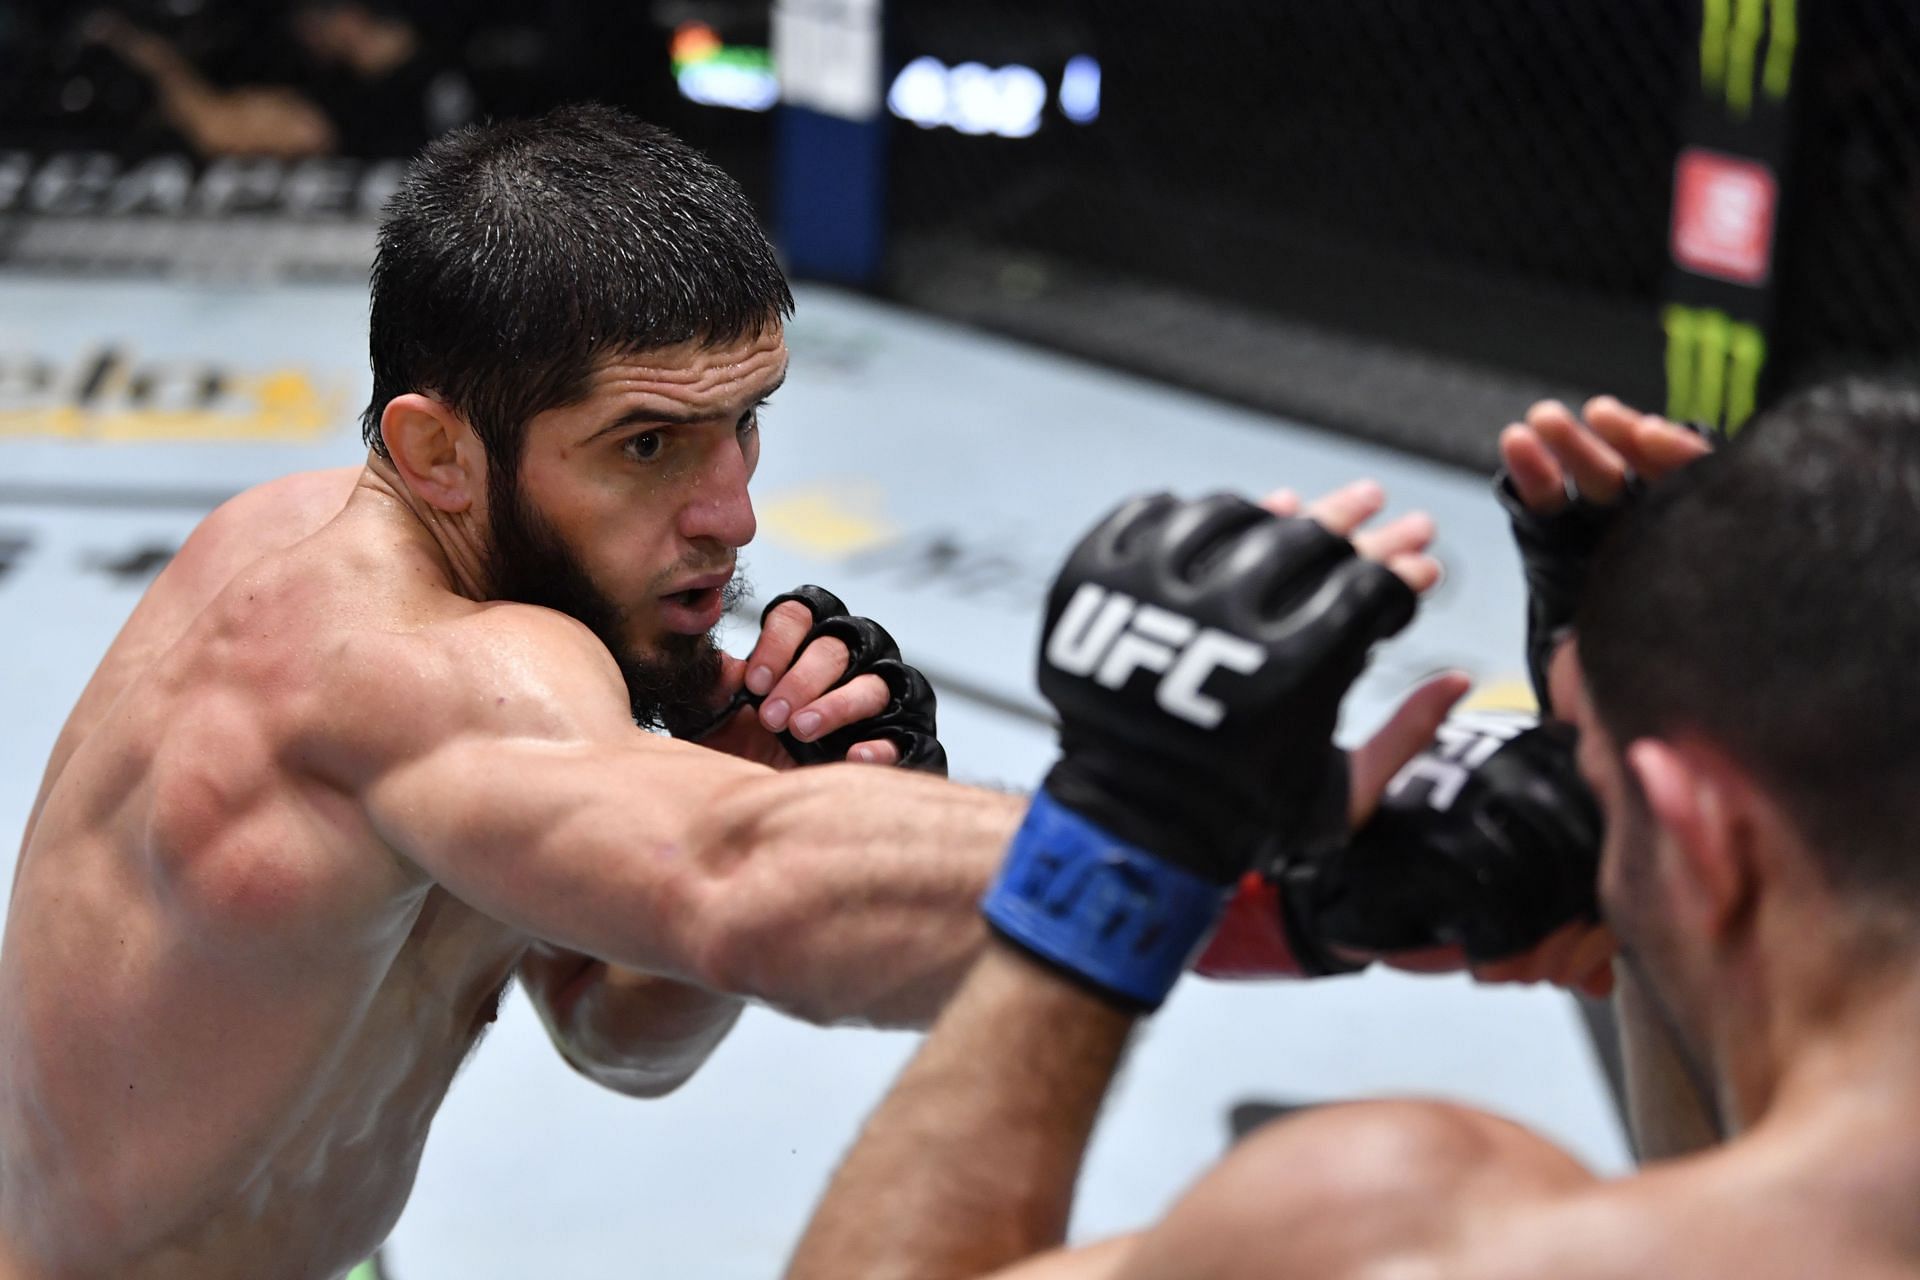 Makhachev is currently ranked No.4 in the lightweight division